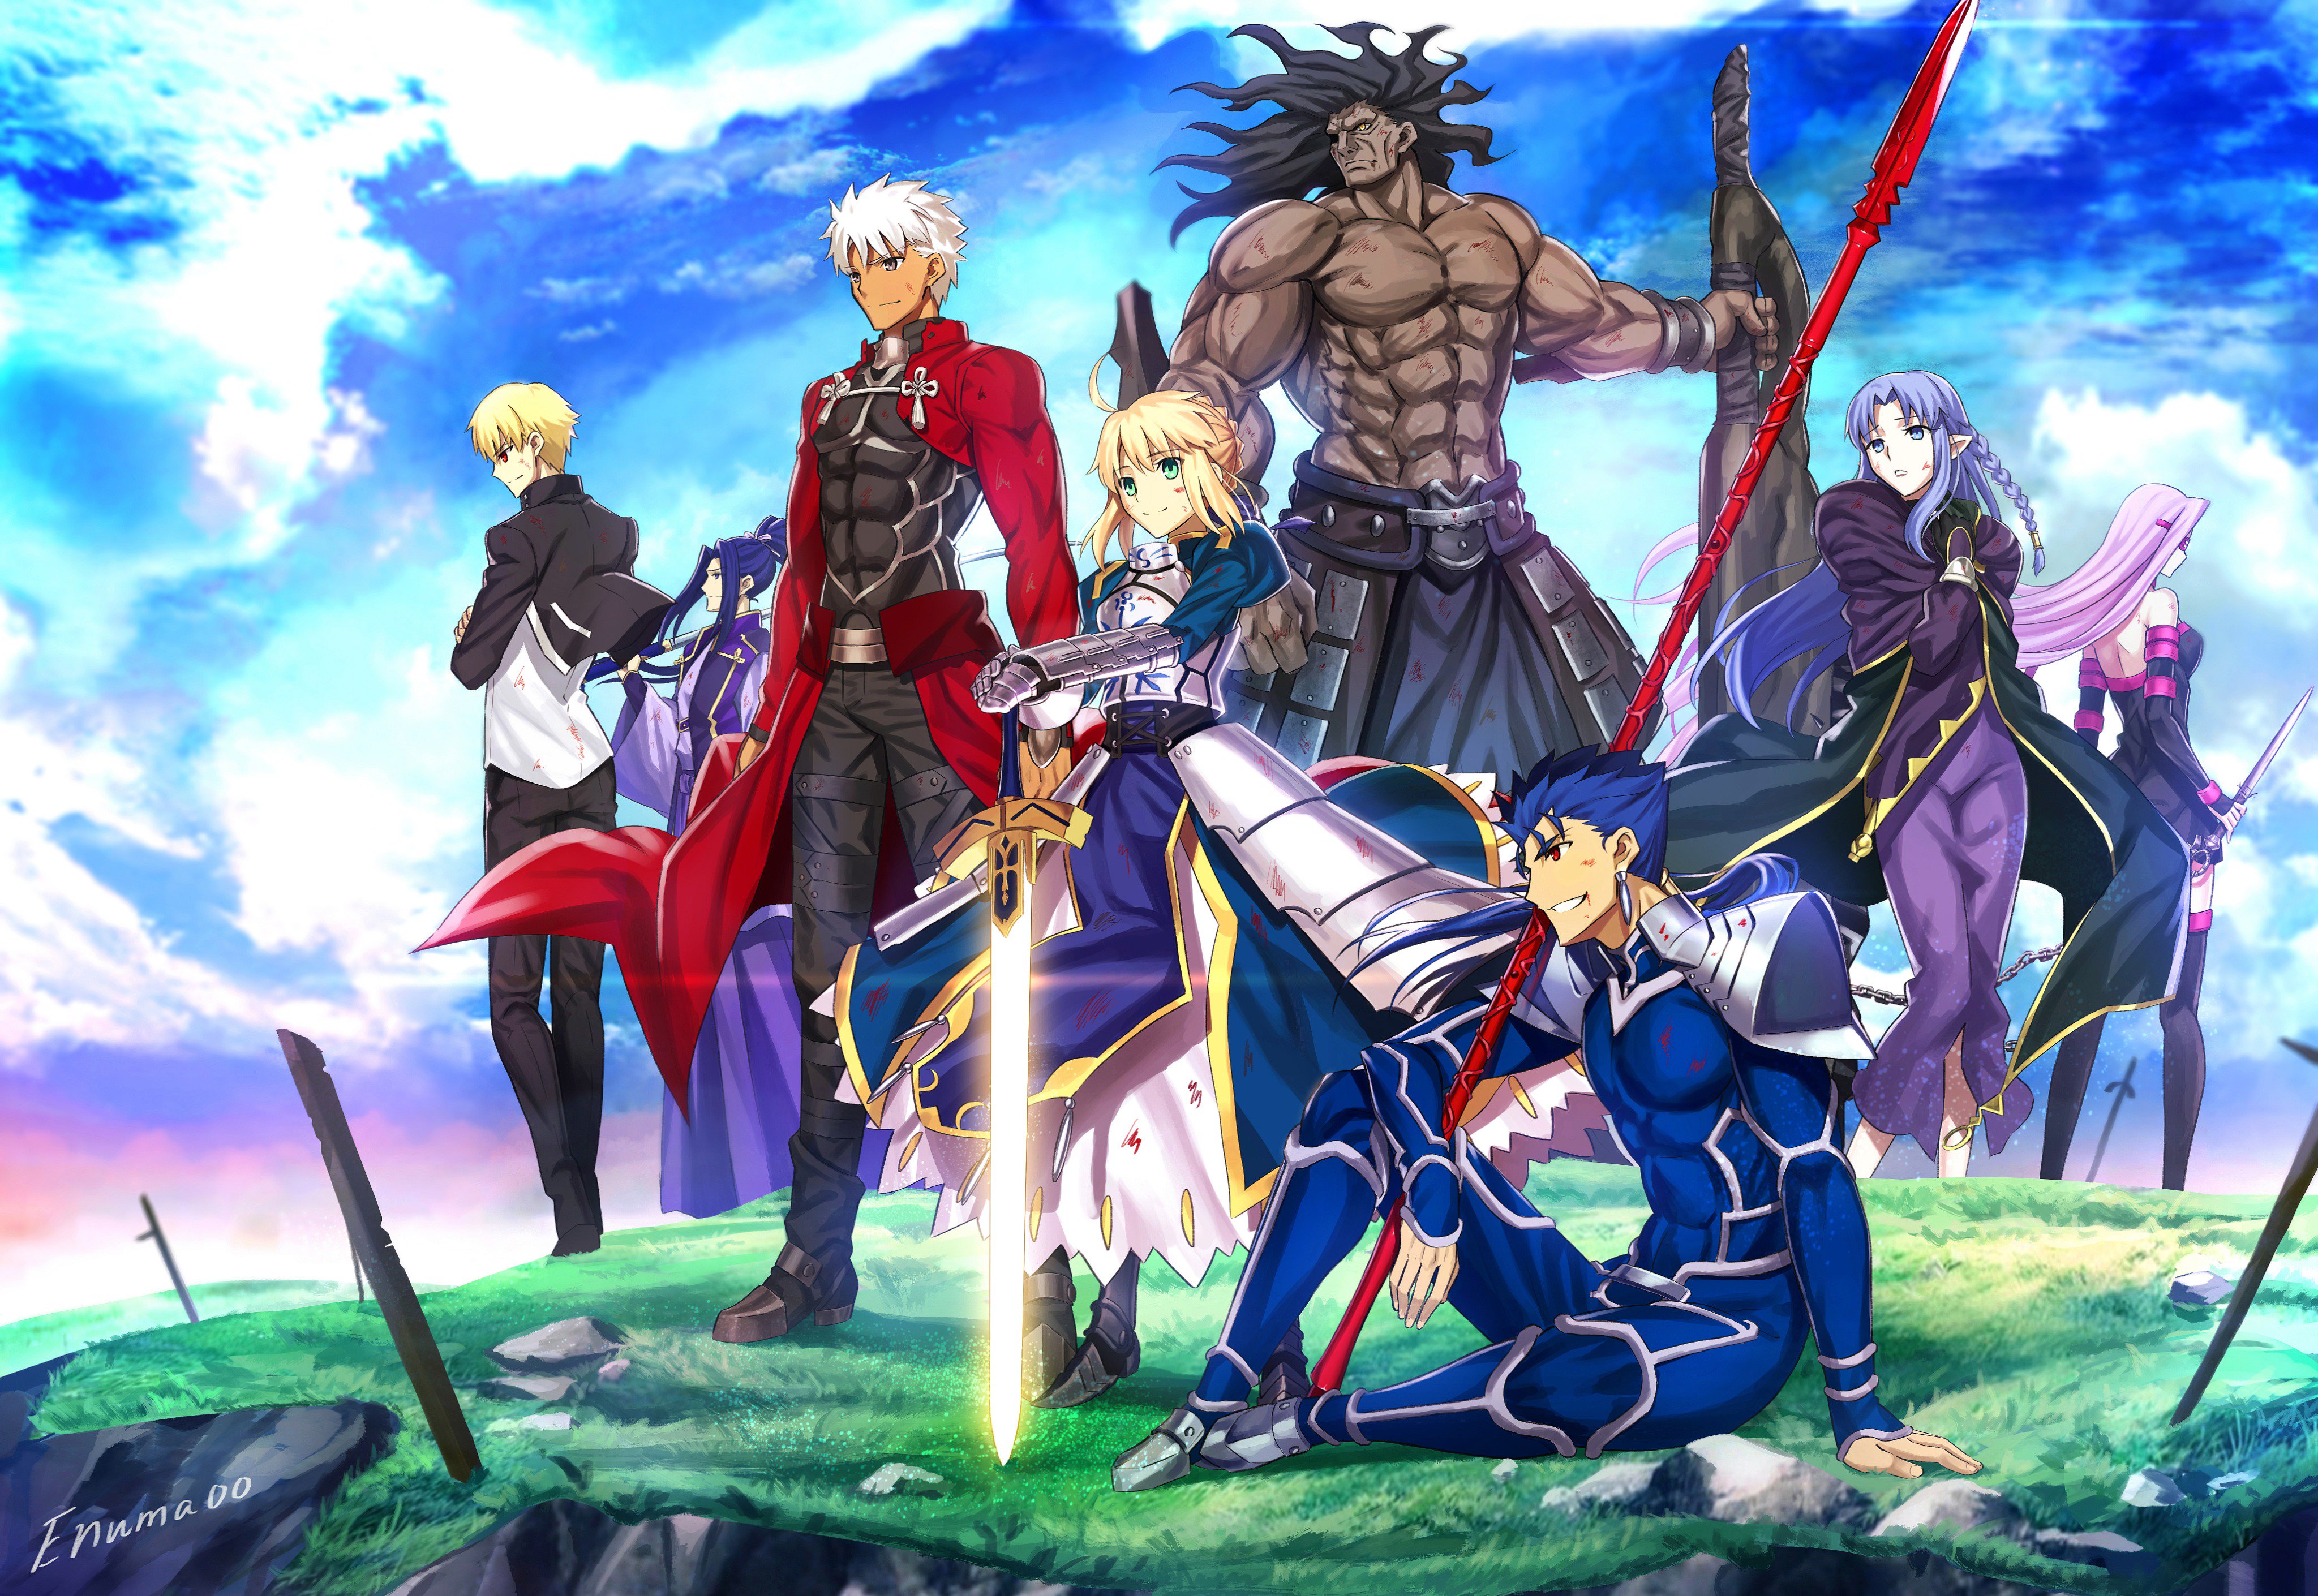 Anime 4096x2821 Fate series Fate/Stay Night Saber Lancer (Fate/Stay Night) Archer (Fate/Stay Night) Caster (Fate/Stay Night) Gilgamesh Rider (Fate/Stay Night) Berserker (Fate/Stay Night)